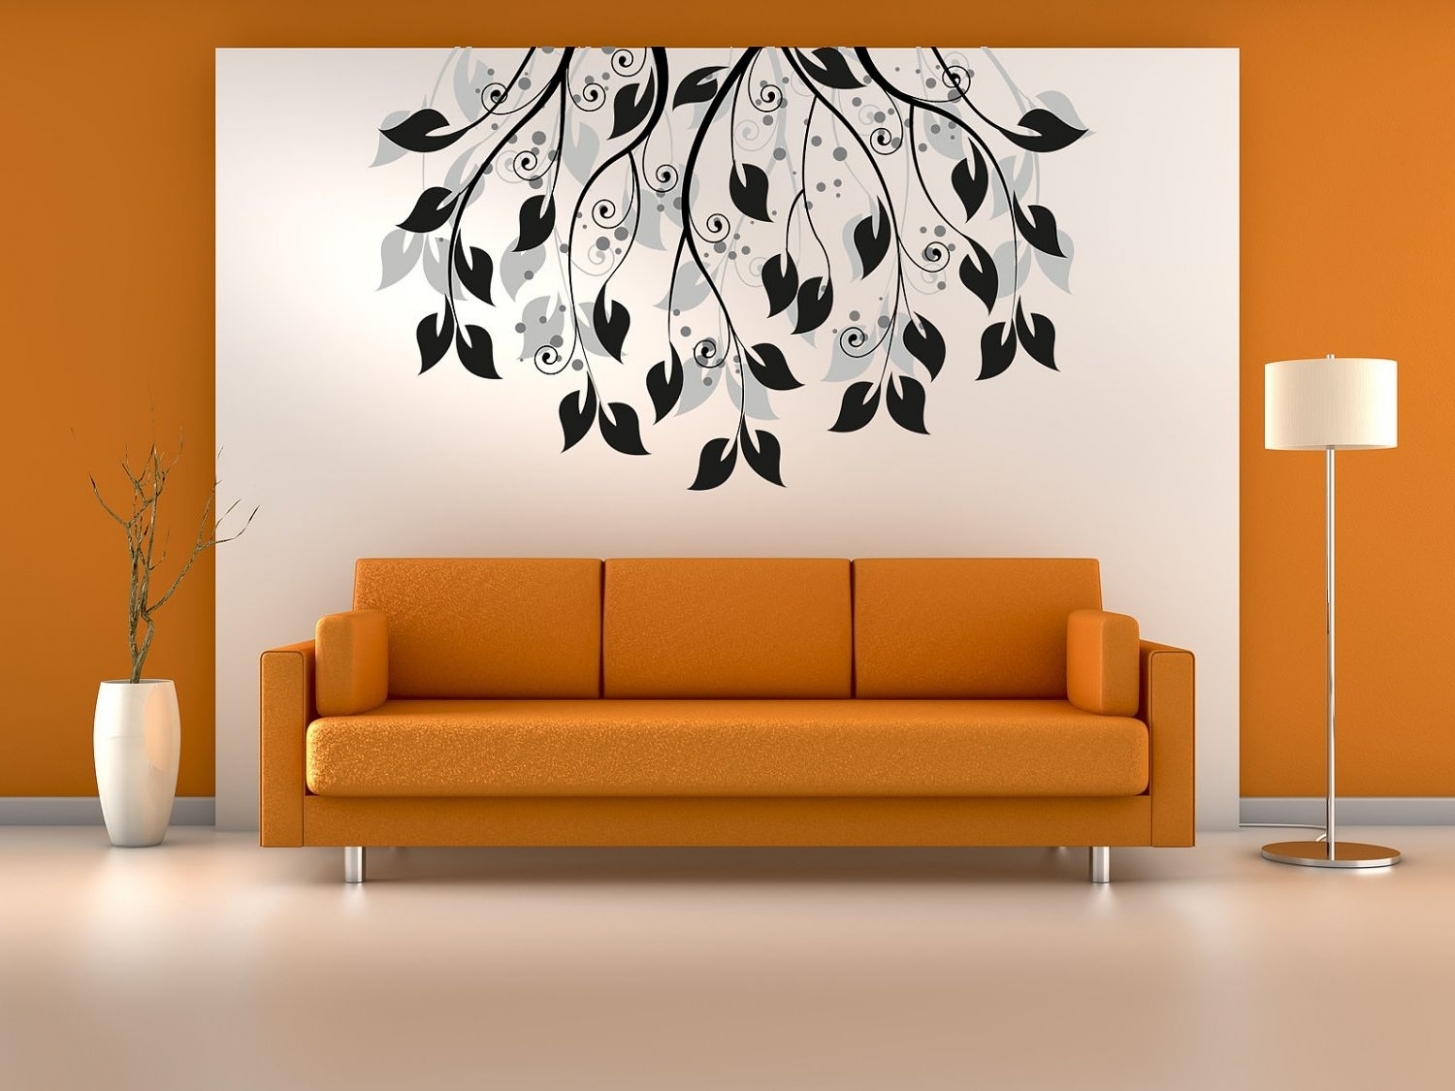 Wall Painting - Home Wall Painting Design - HD Wallpaper 